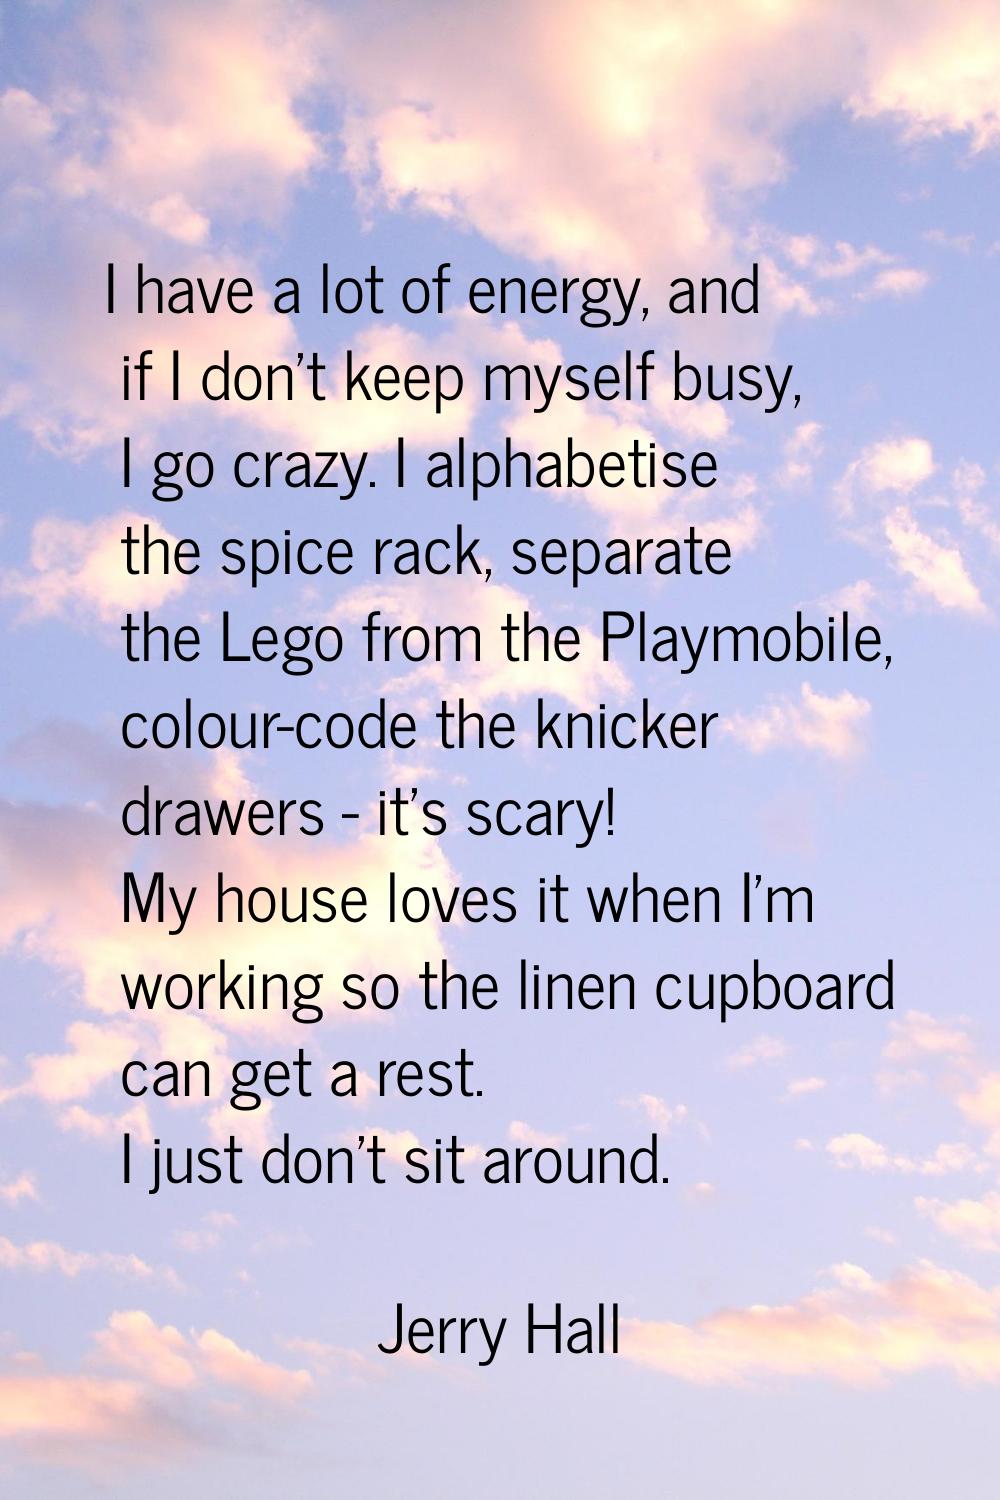 I have a lot of energy, and if I don't keep myself busy, I go crazy. I alphabetise the spice rack, 